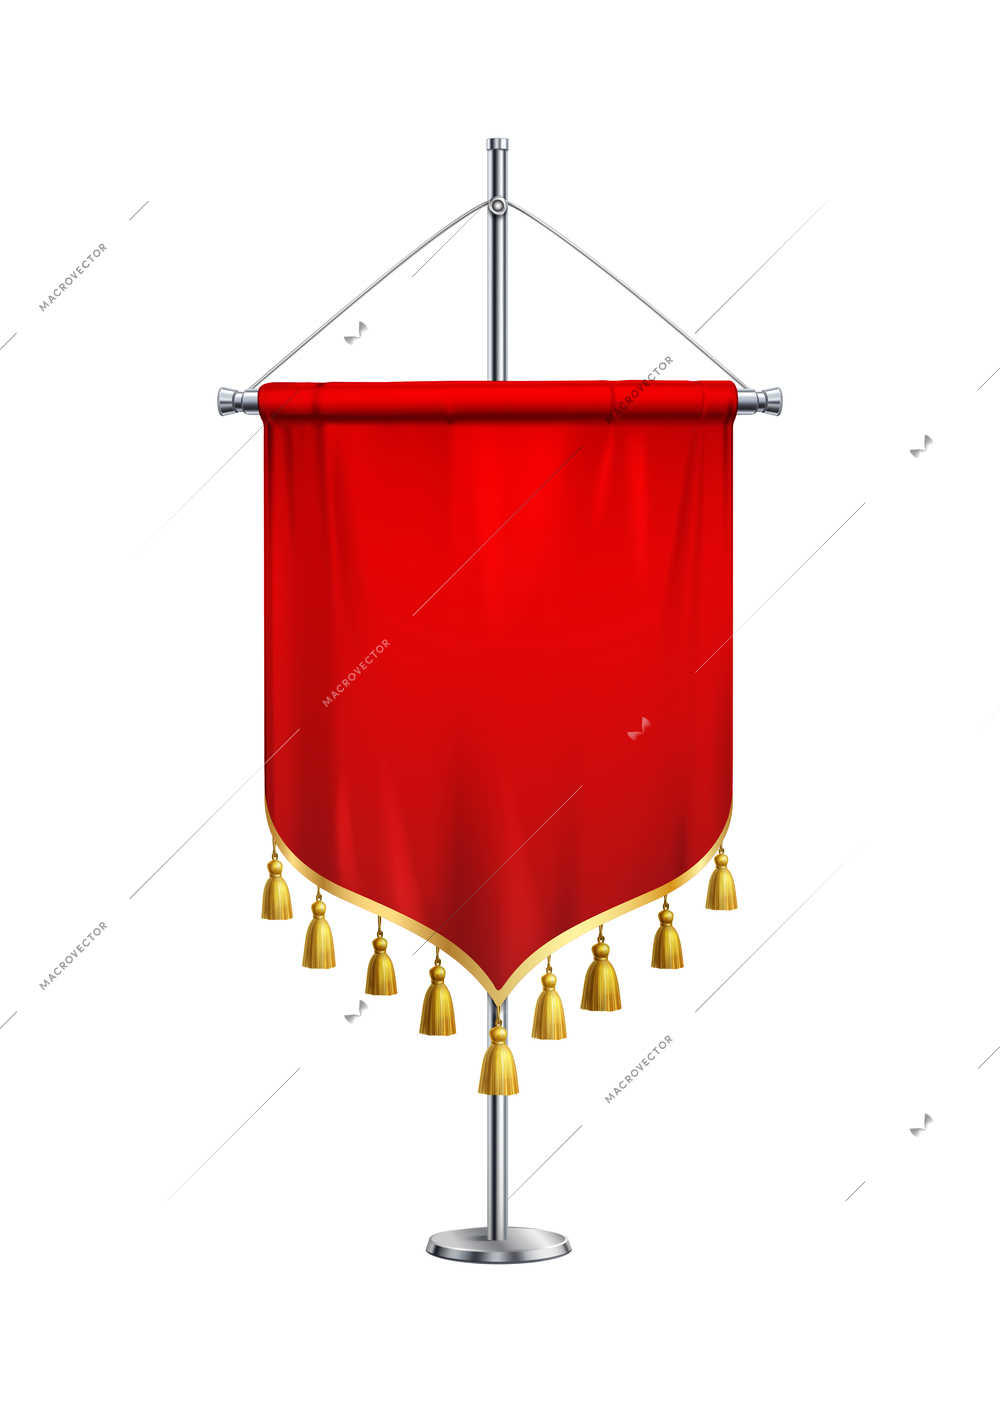 Blank red satin pennant with golden fringe on steel pole realistic vector illustration